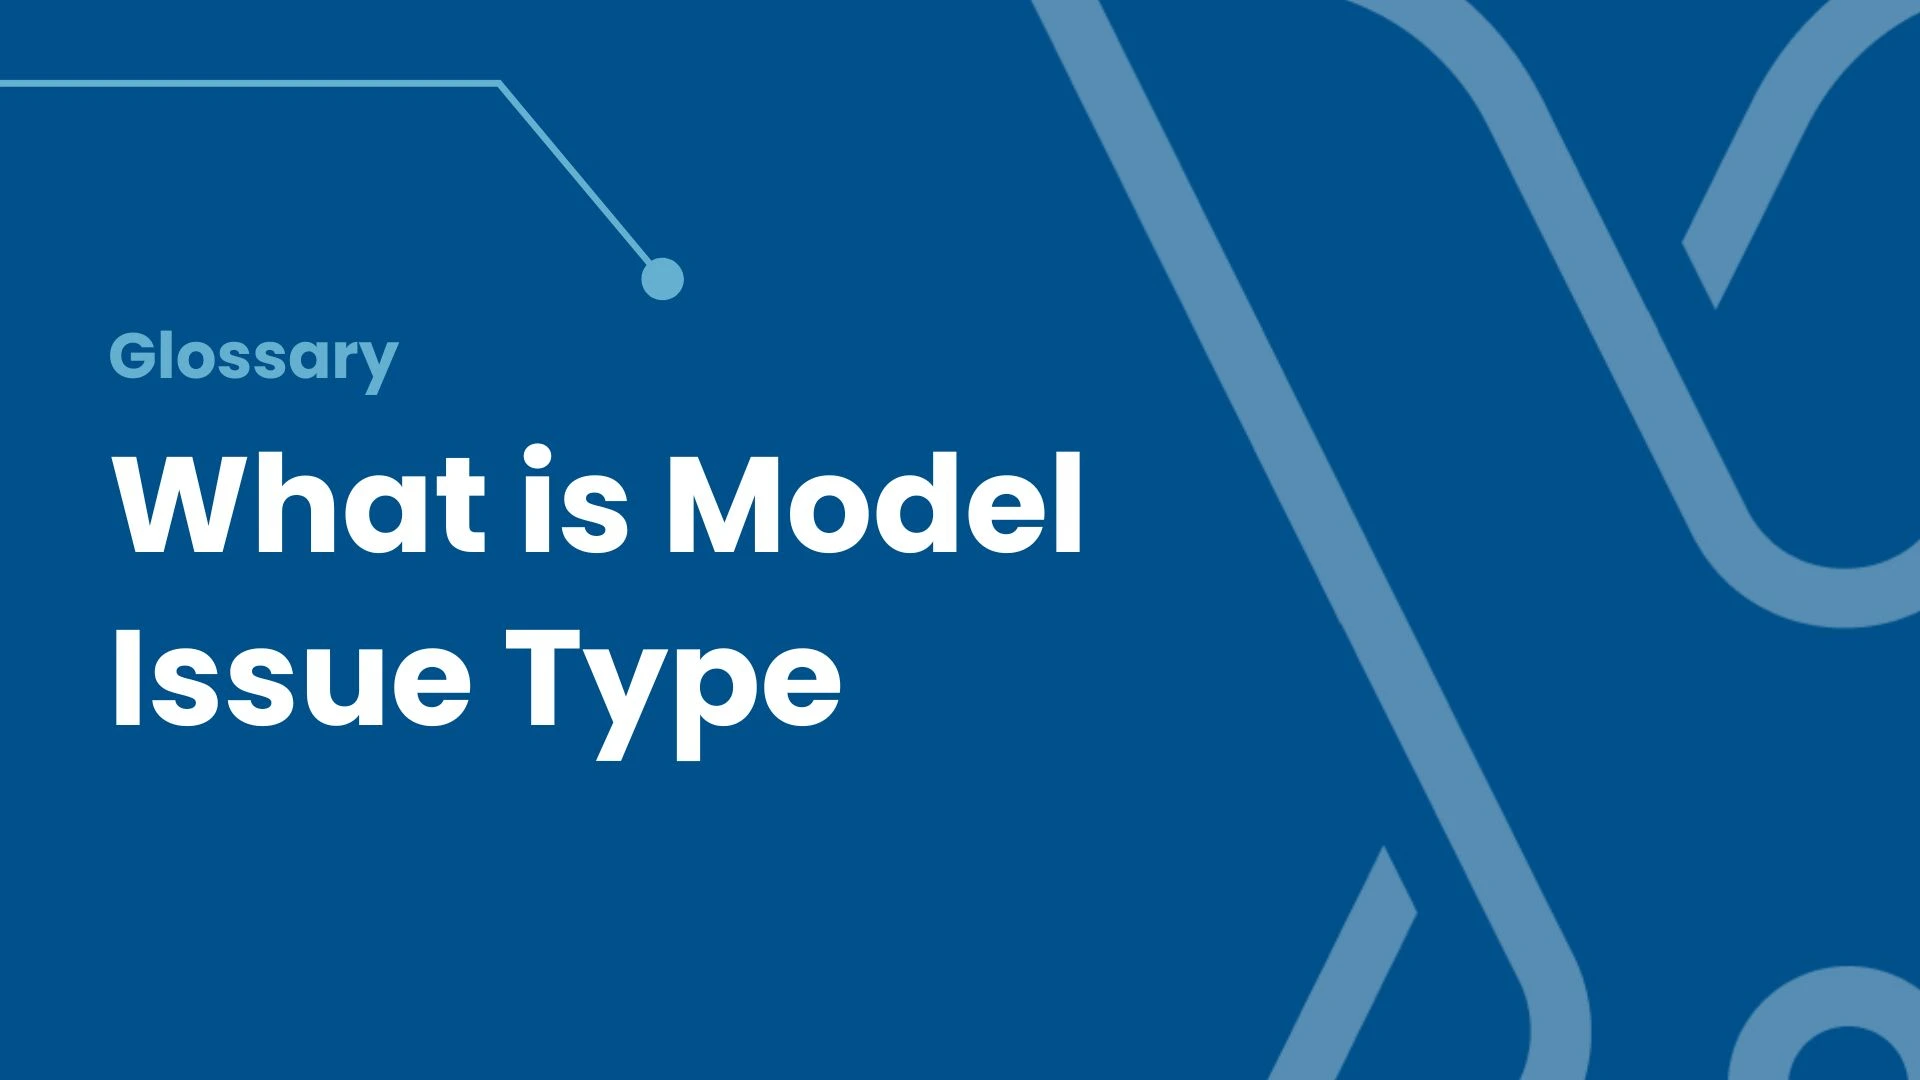 What is a Model Issue Type?